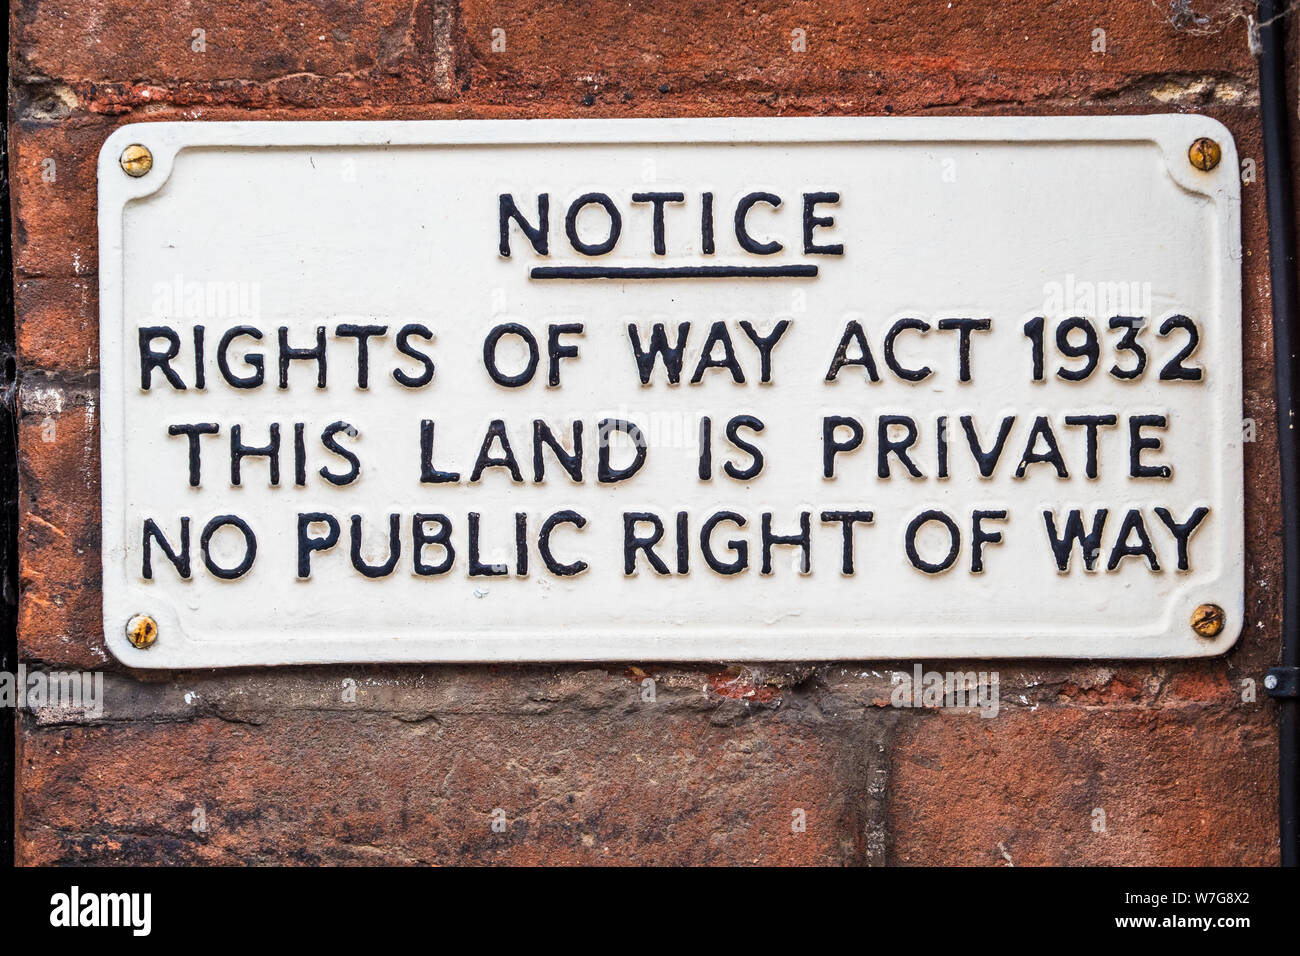 Rights of Way Notice Sign  - Rights of Way Act 1932 This Land is Private No Public Right of Way Stock Photo